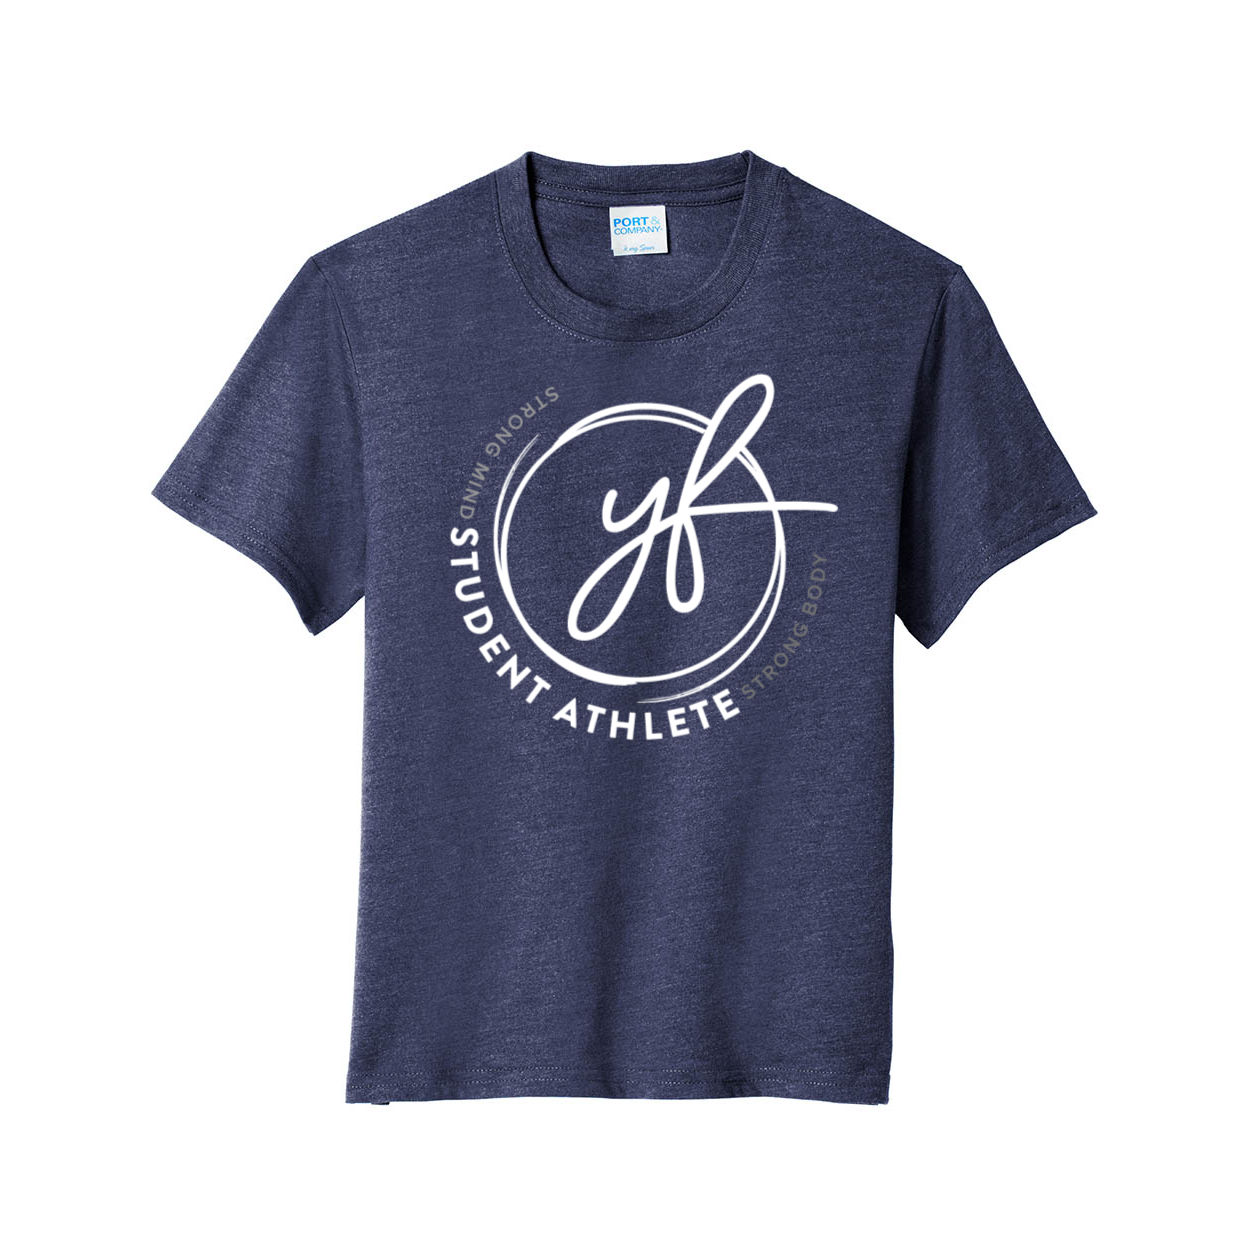 YOLO FITTED STUDENT ATHLETE SHIRT YOUTH SIZES - Yolofitted